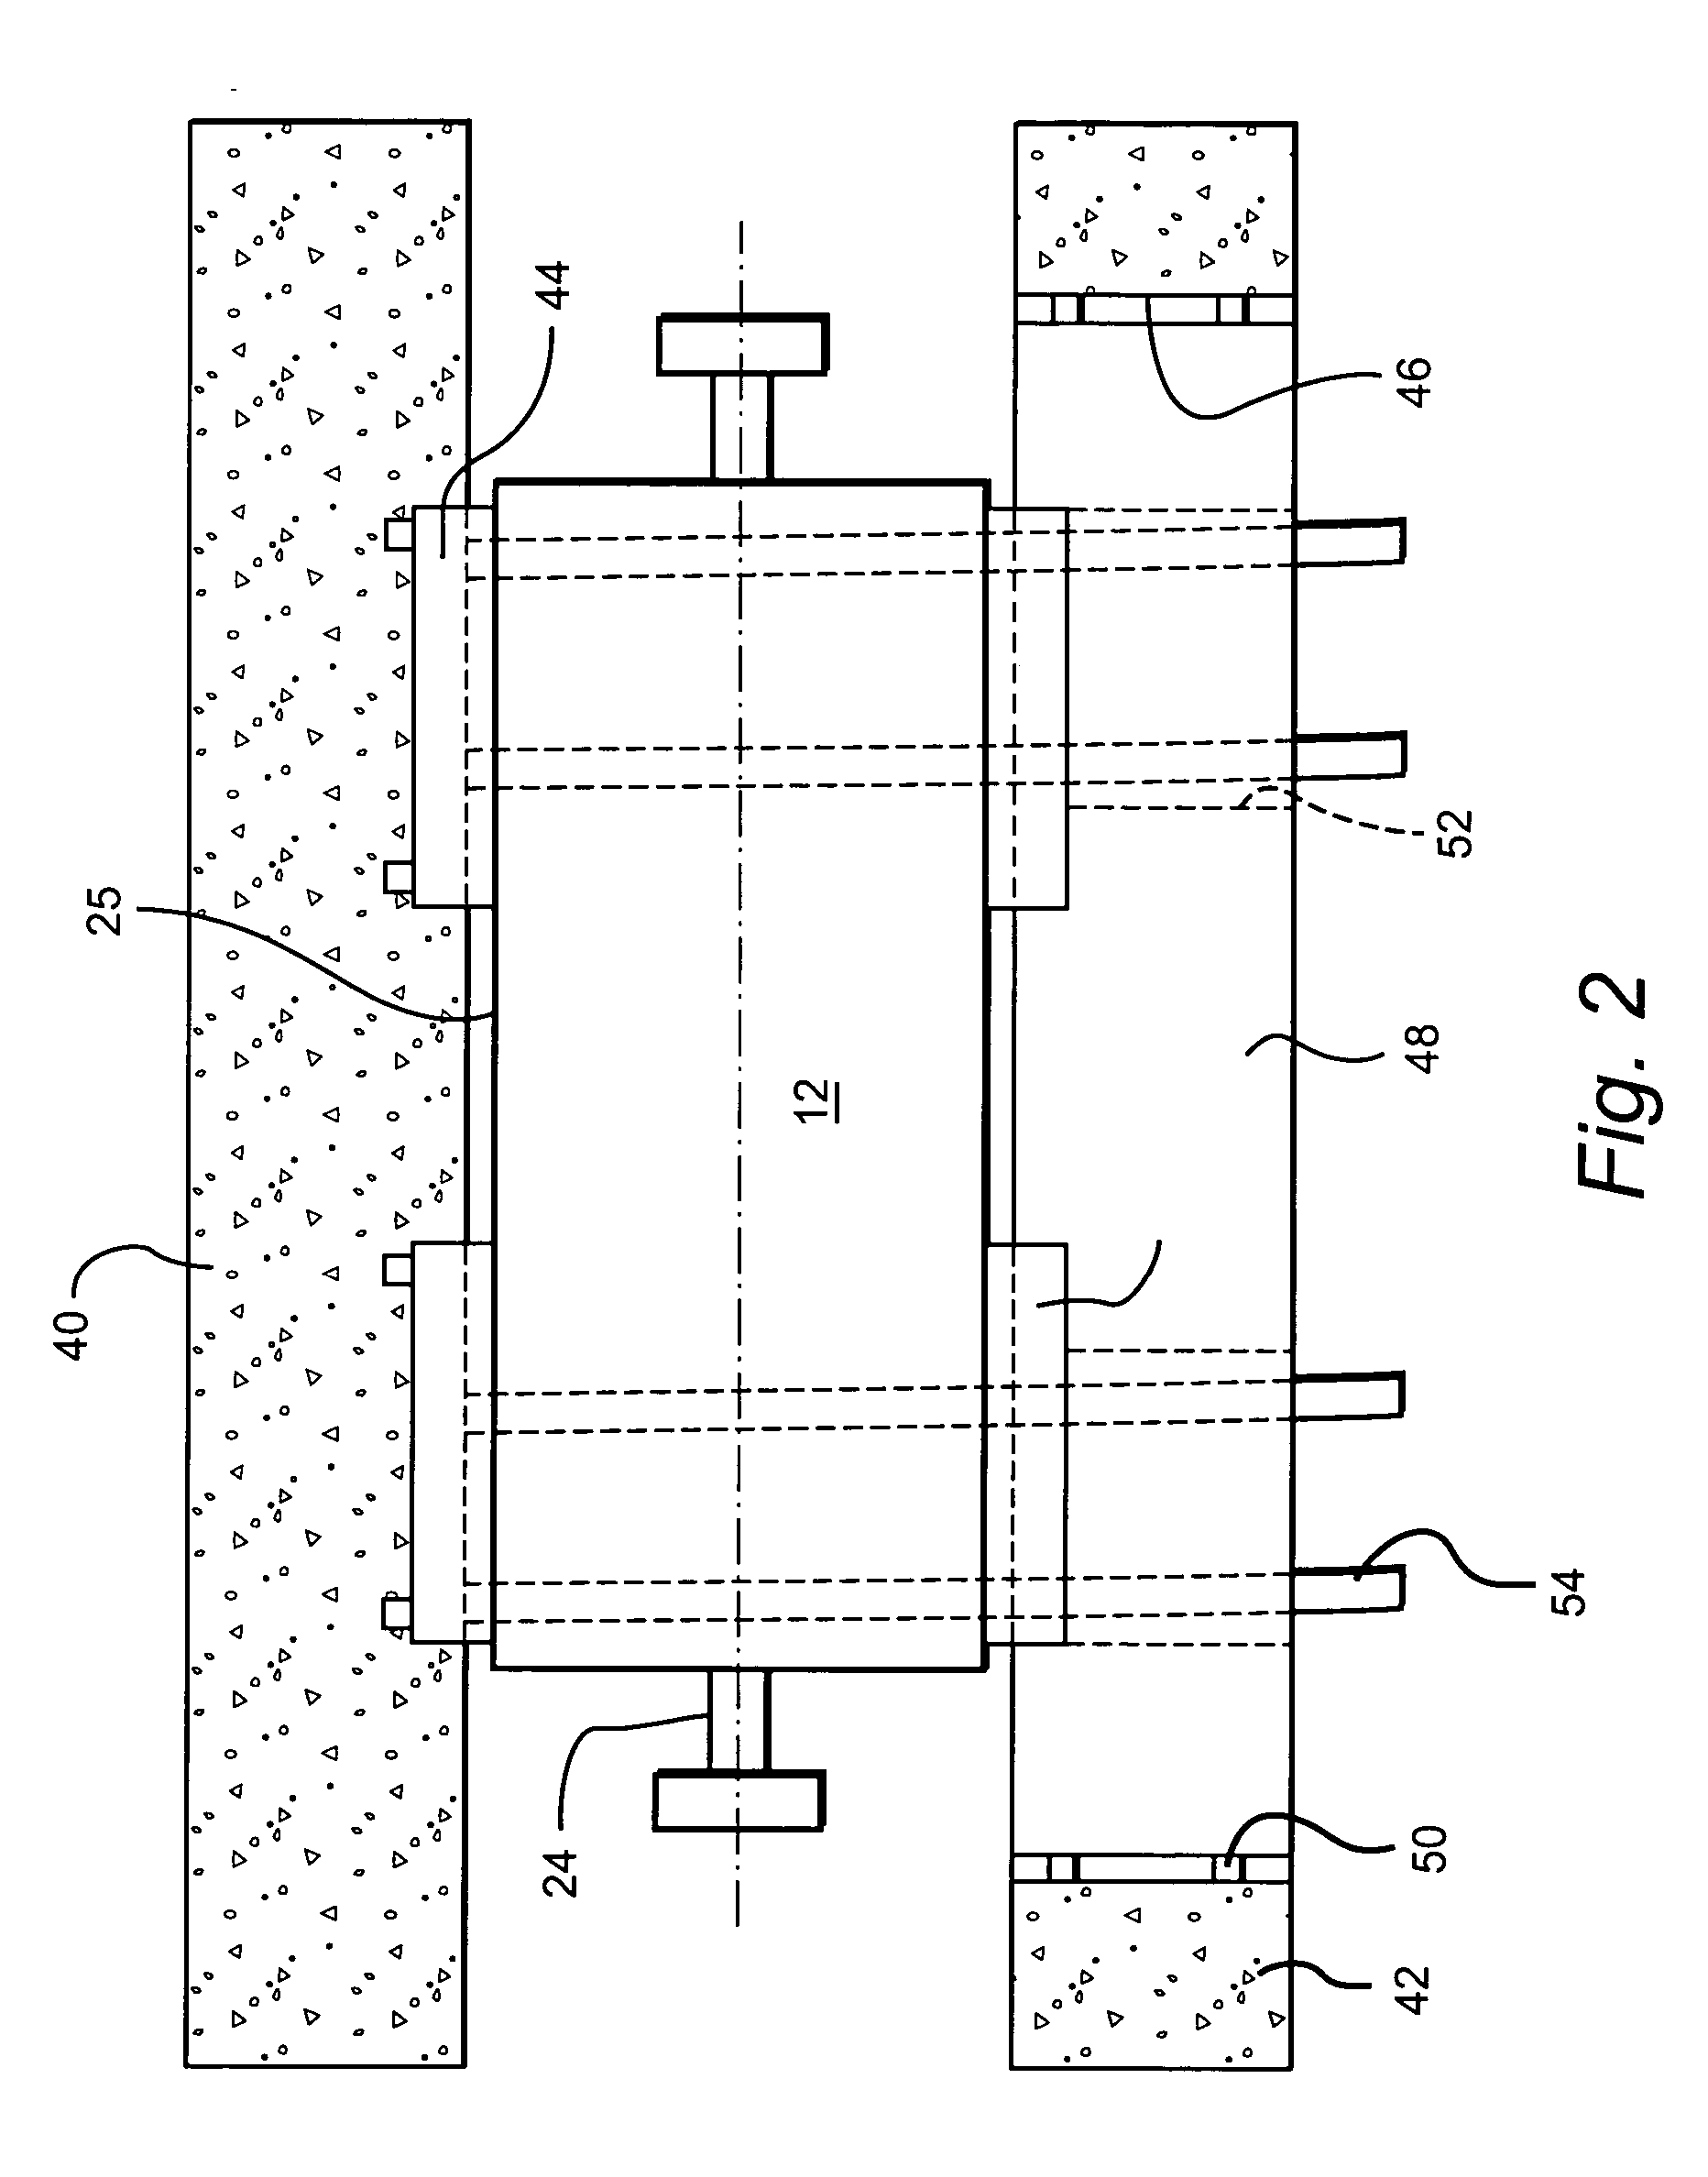 Methods of generator rotor removal in a combined-cycle stag application